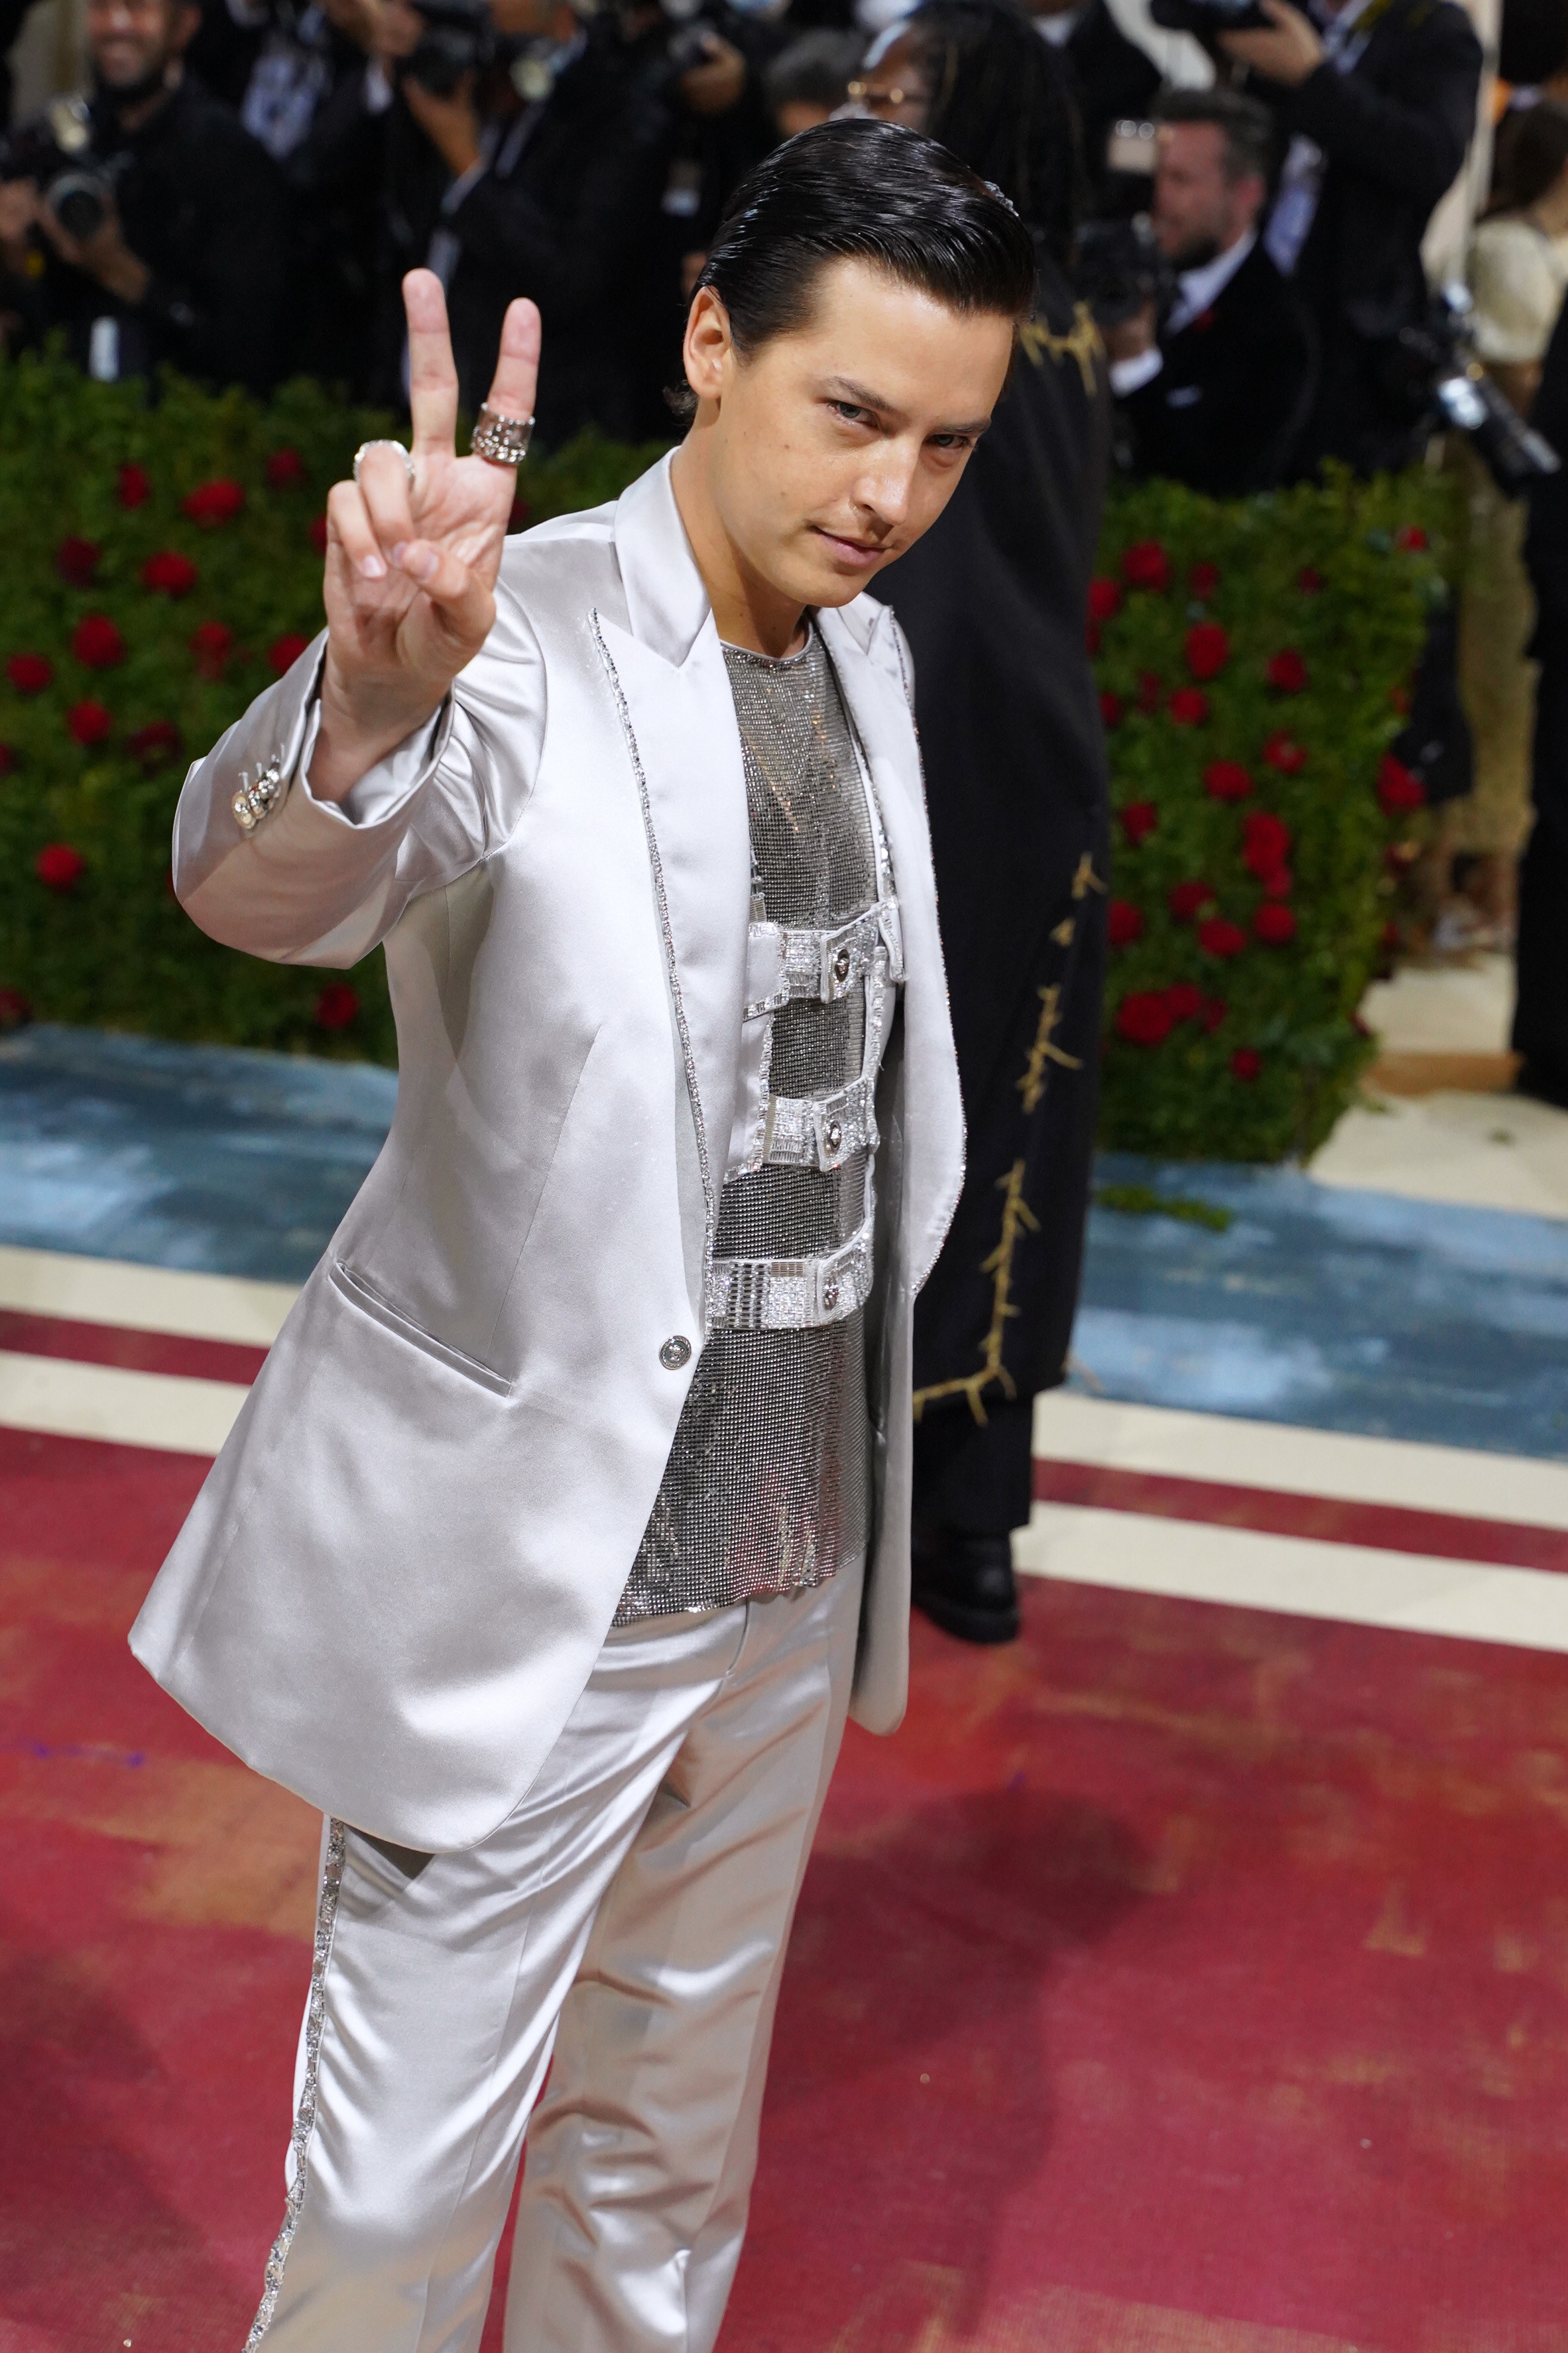 cole giving the peace sign on the red carpet